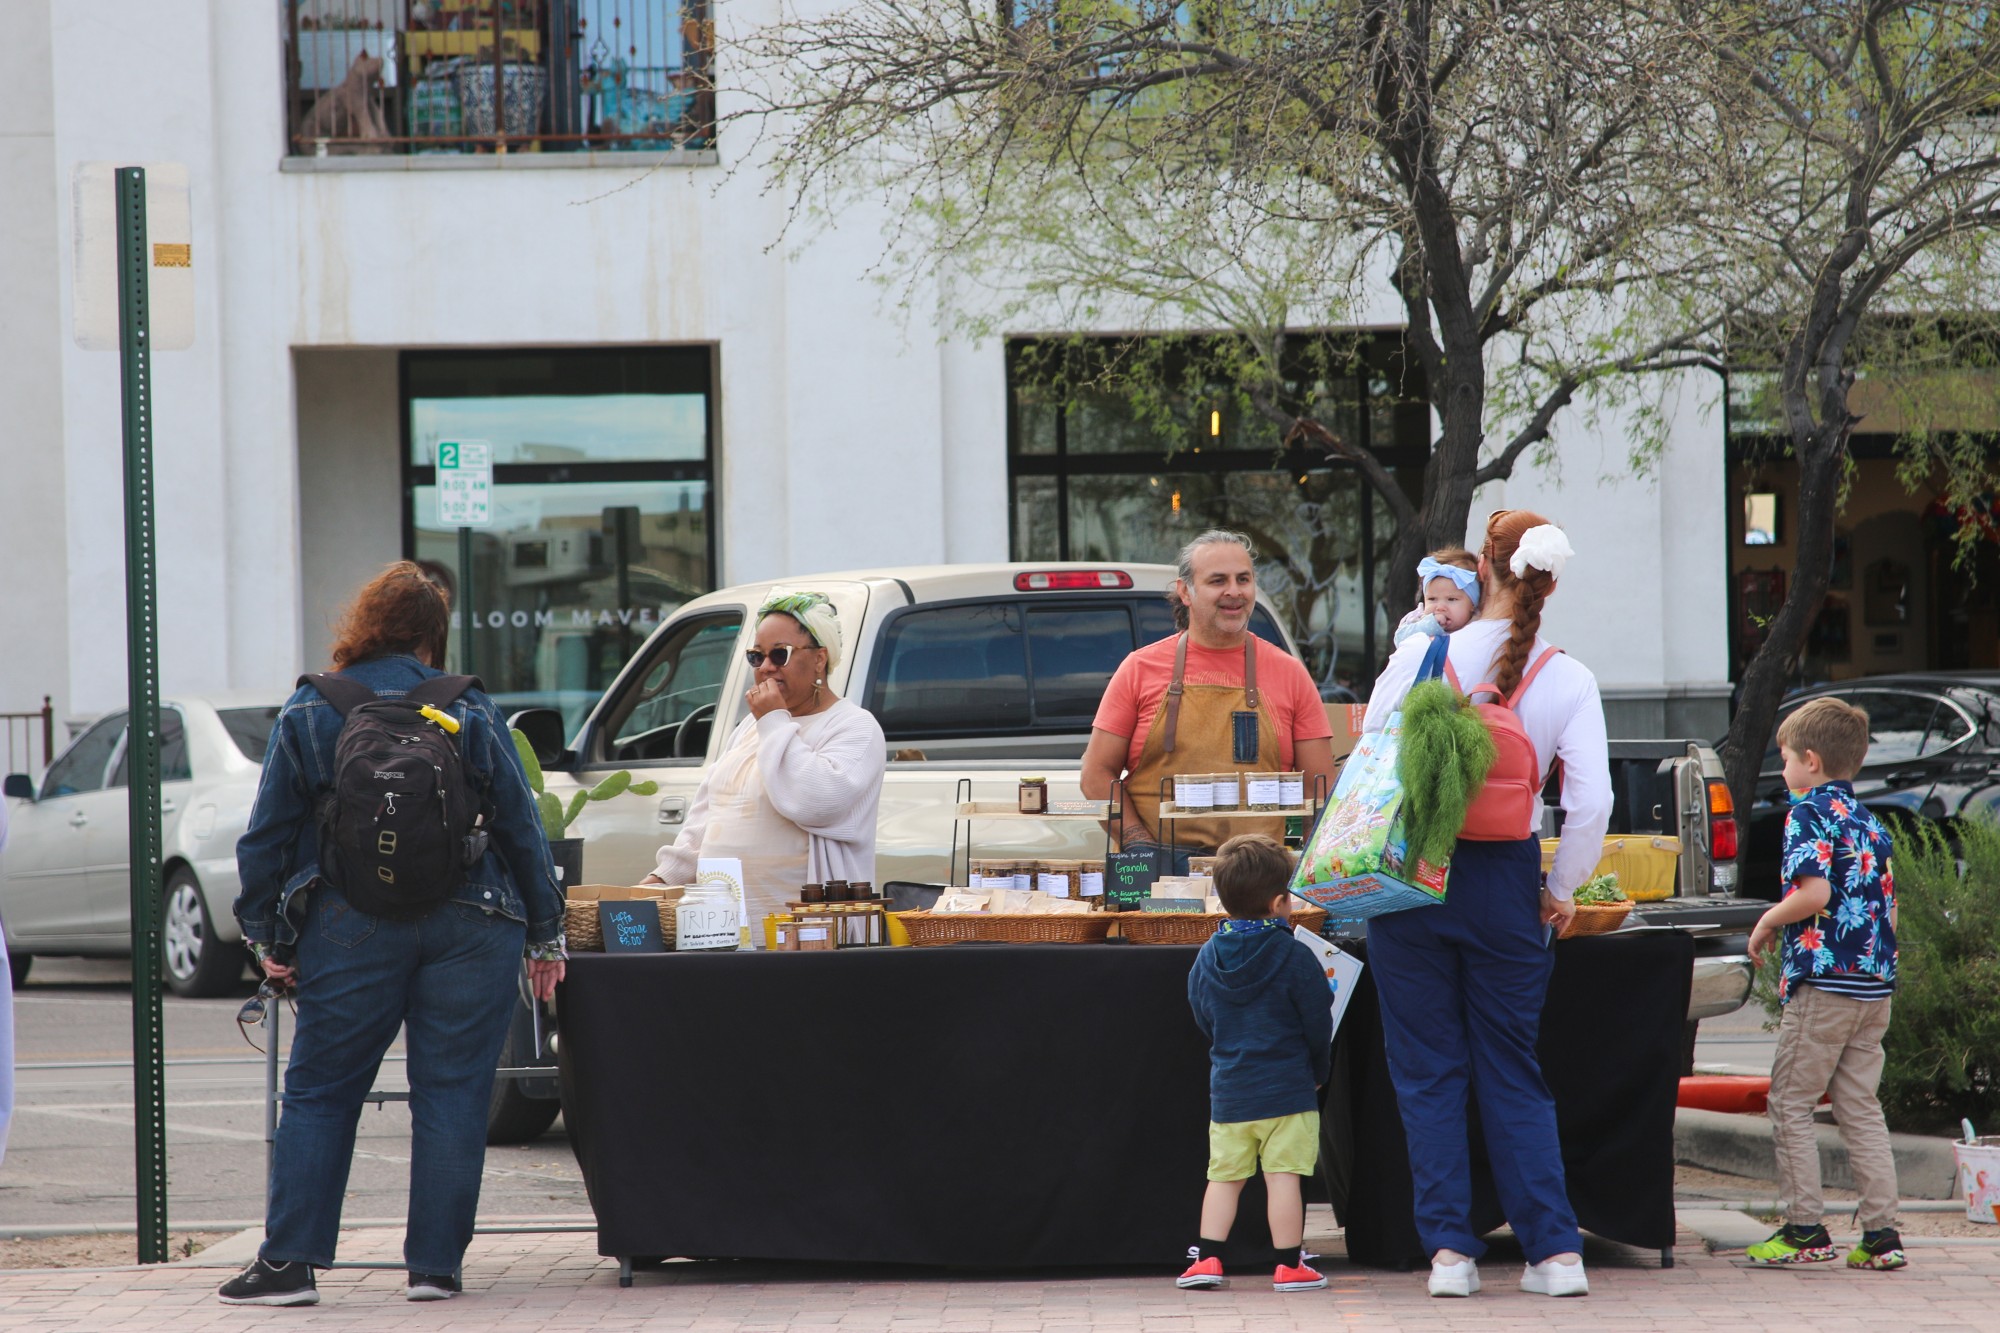 The Santa Cruz River Farmers’ Market hosts around 15 vendors every week, each selling a variety of produce, baked goods, soaps and more! Starting in May, the market's hours will be 4-7 p.m. every Thursday at 221 S. Avenida del Convento. 